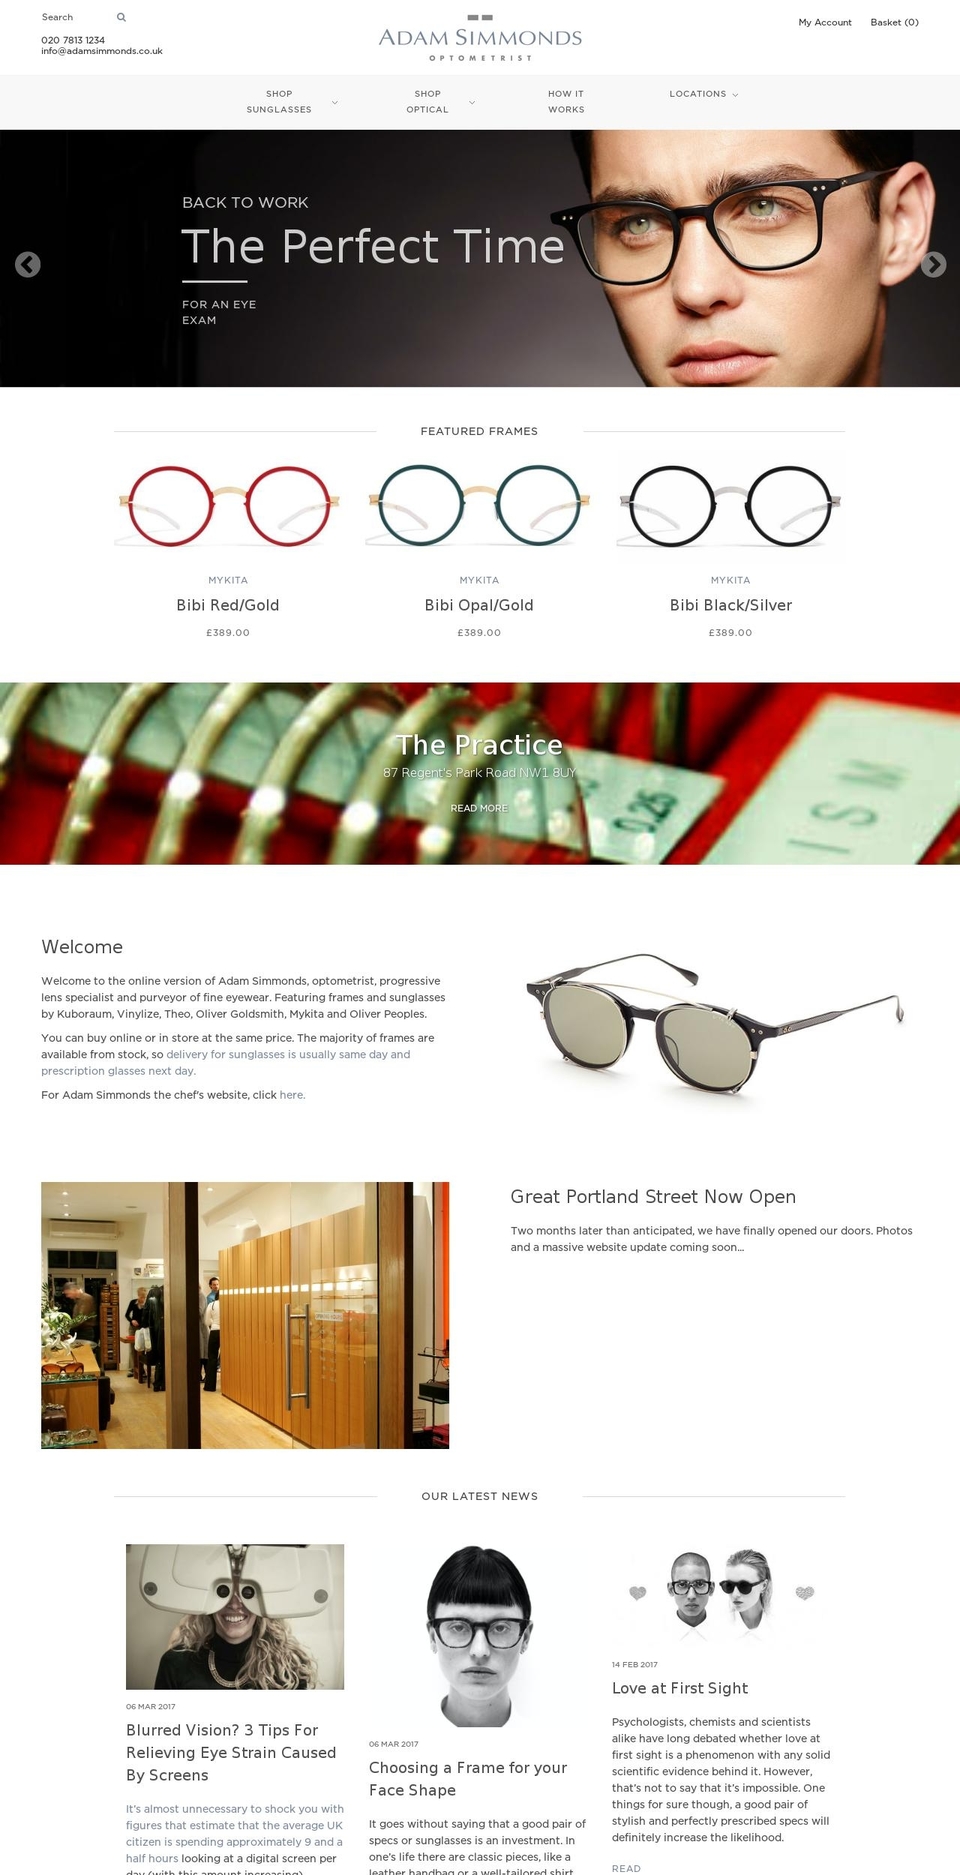 Kagami Shopify theme site example adamsimmonds.co.uk